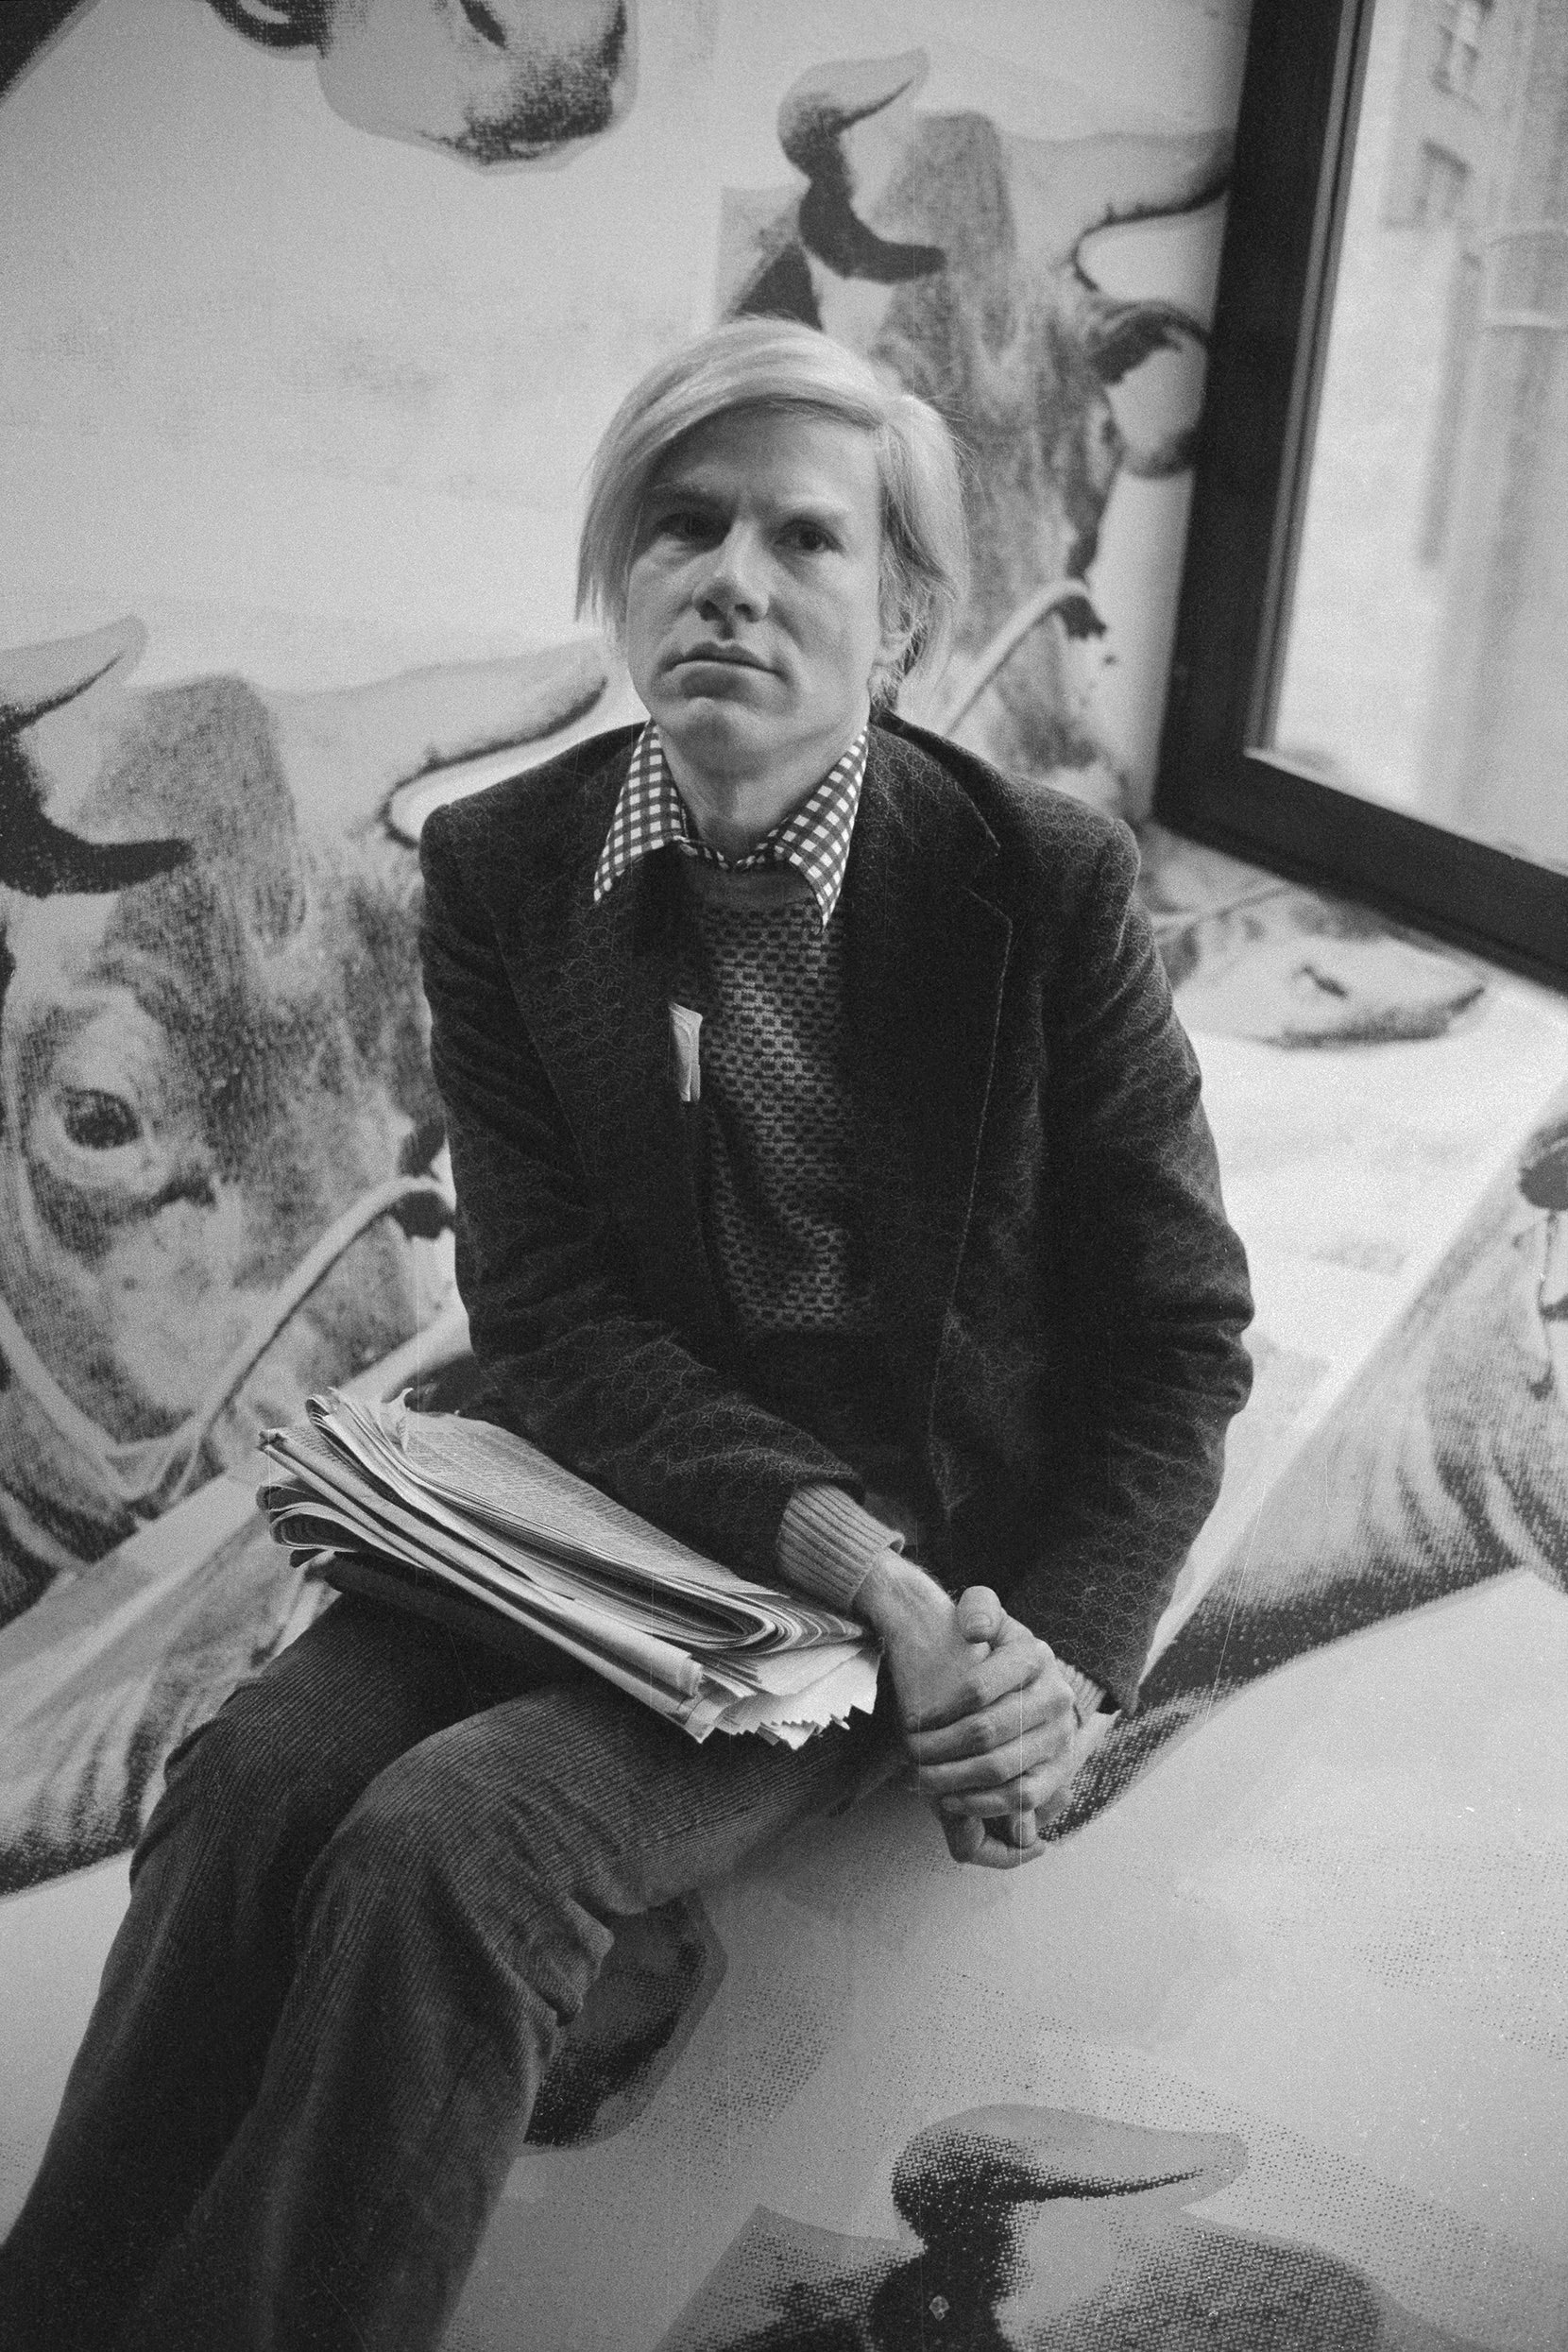 Andy Warhol sitting during the opening of his exhibition at the Whitney Museum.